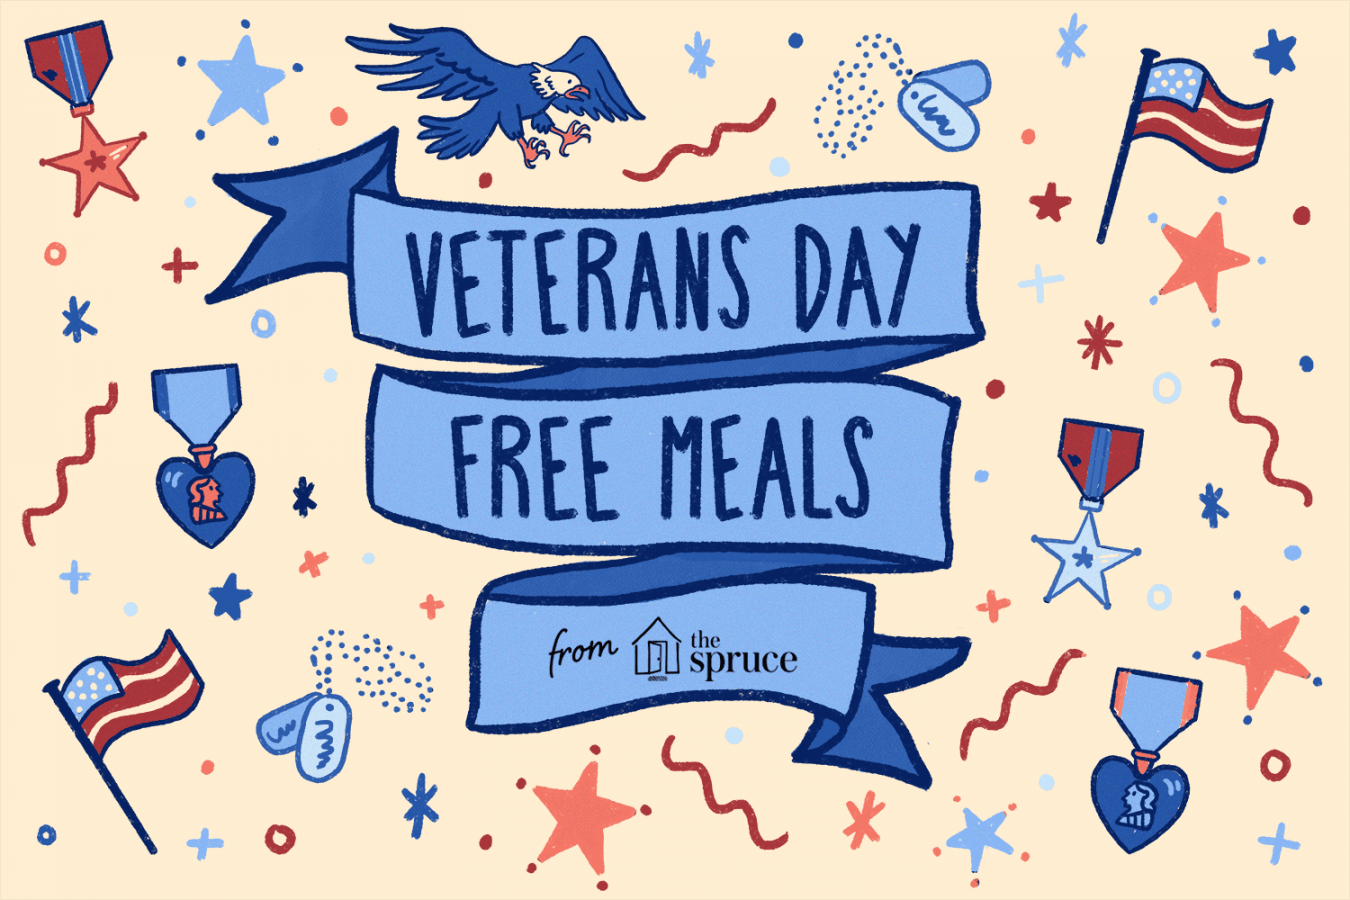 Printable List of Veterans Day Free Meals - Printable -  Restaurants Having Veterans Day Free Meals In